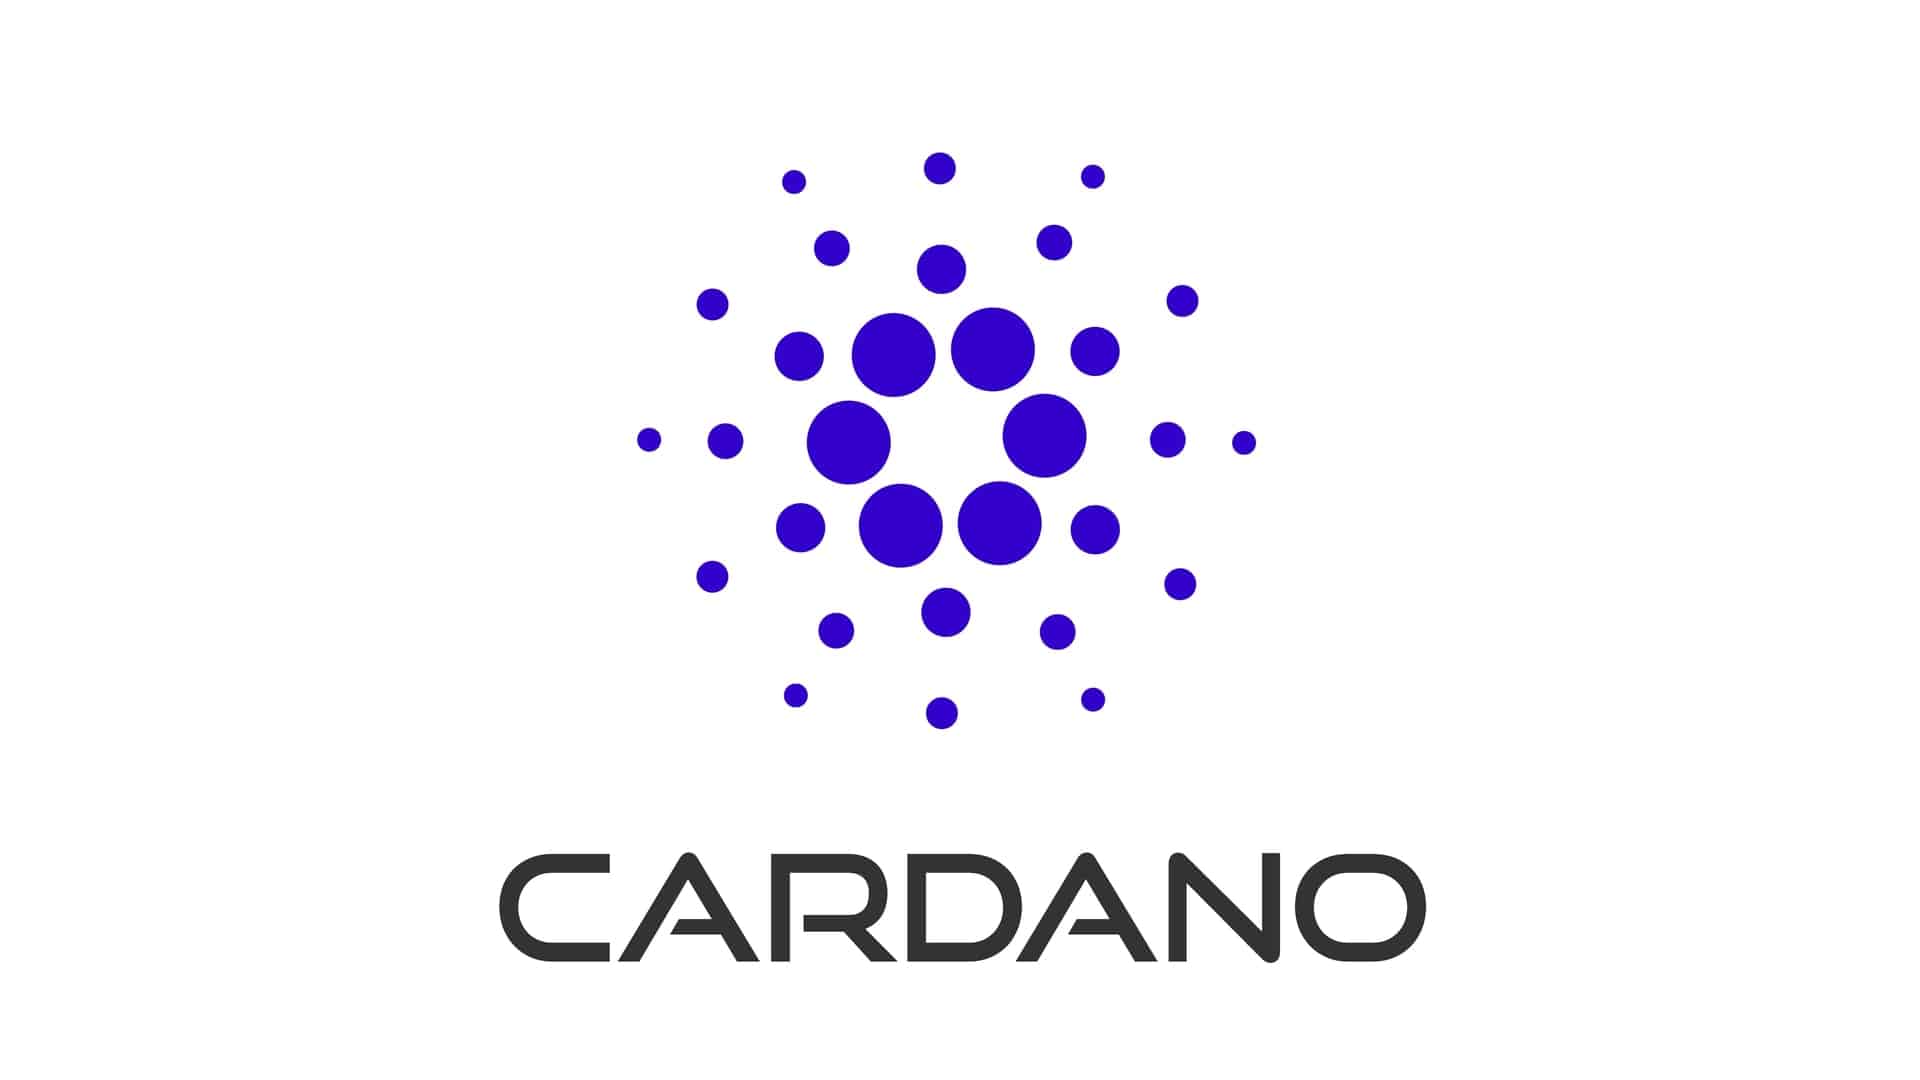 ADA Price Prediction: Here’s Why Cardano is Not a Good Investment